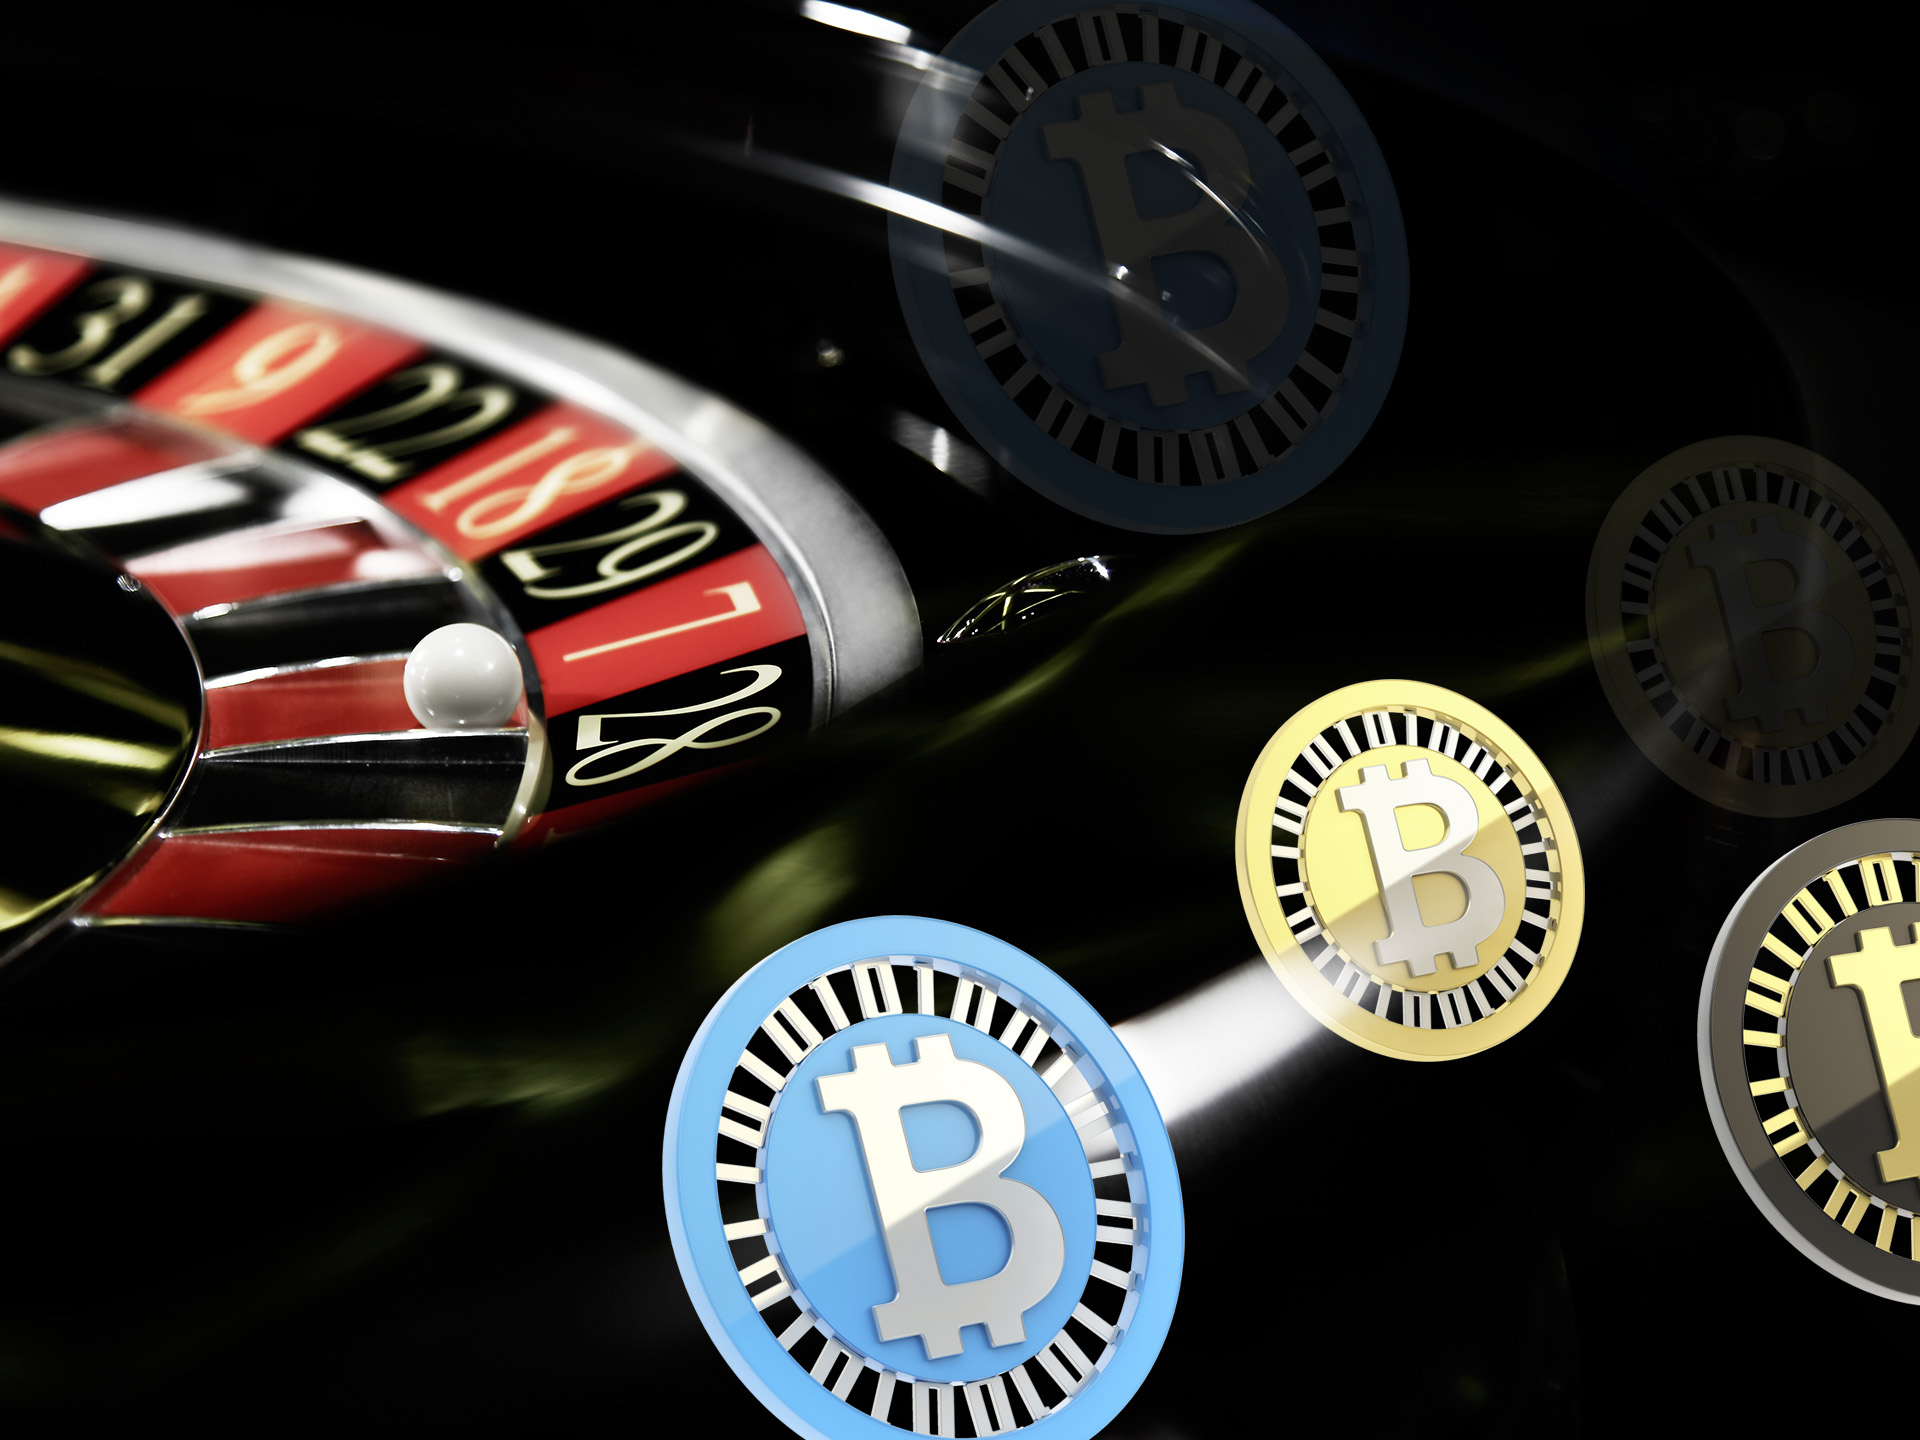 3 Kinds Of best bitcoin casinos: Which One Will Make The Most Money?